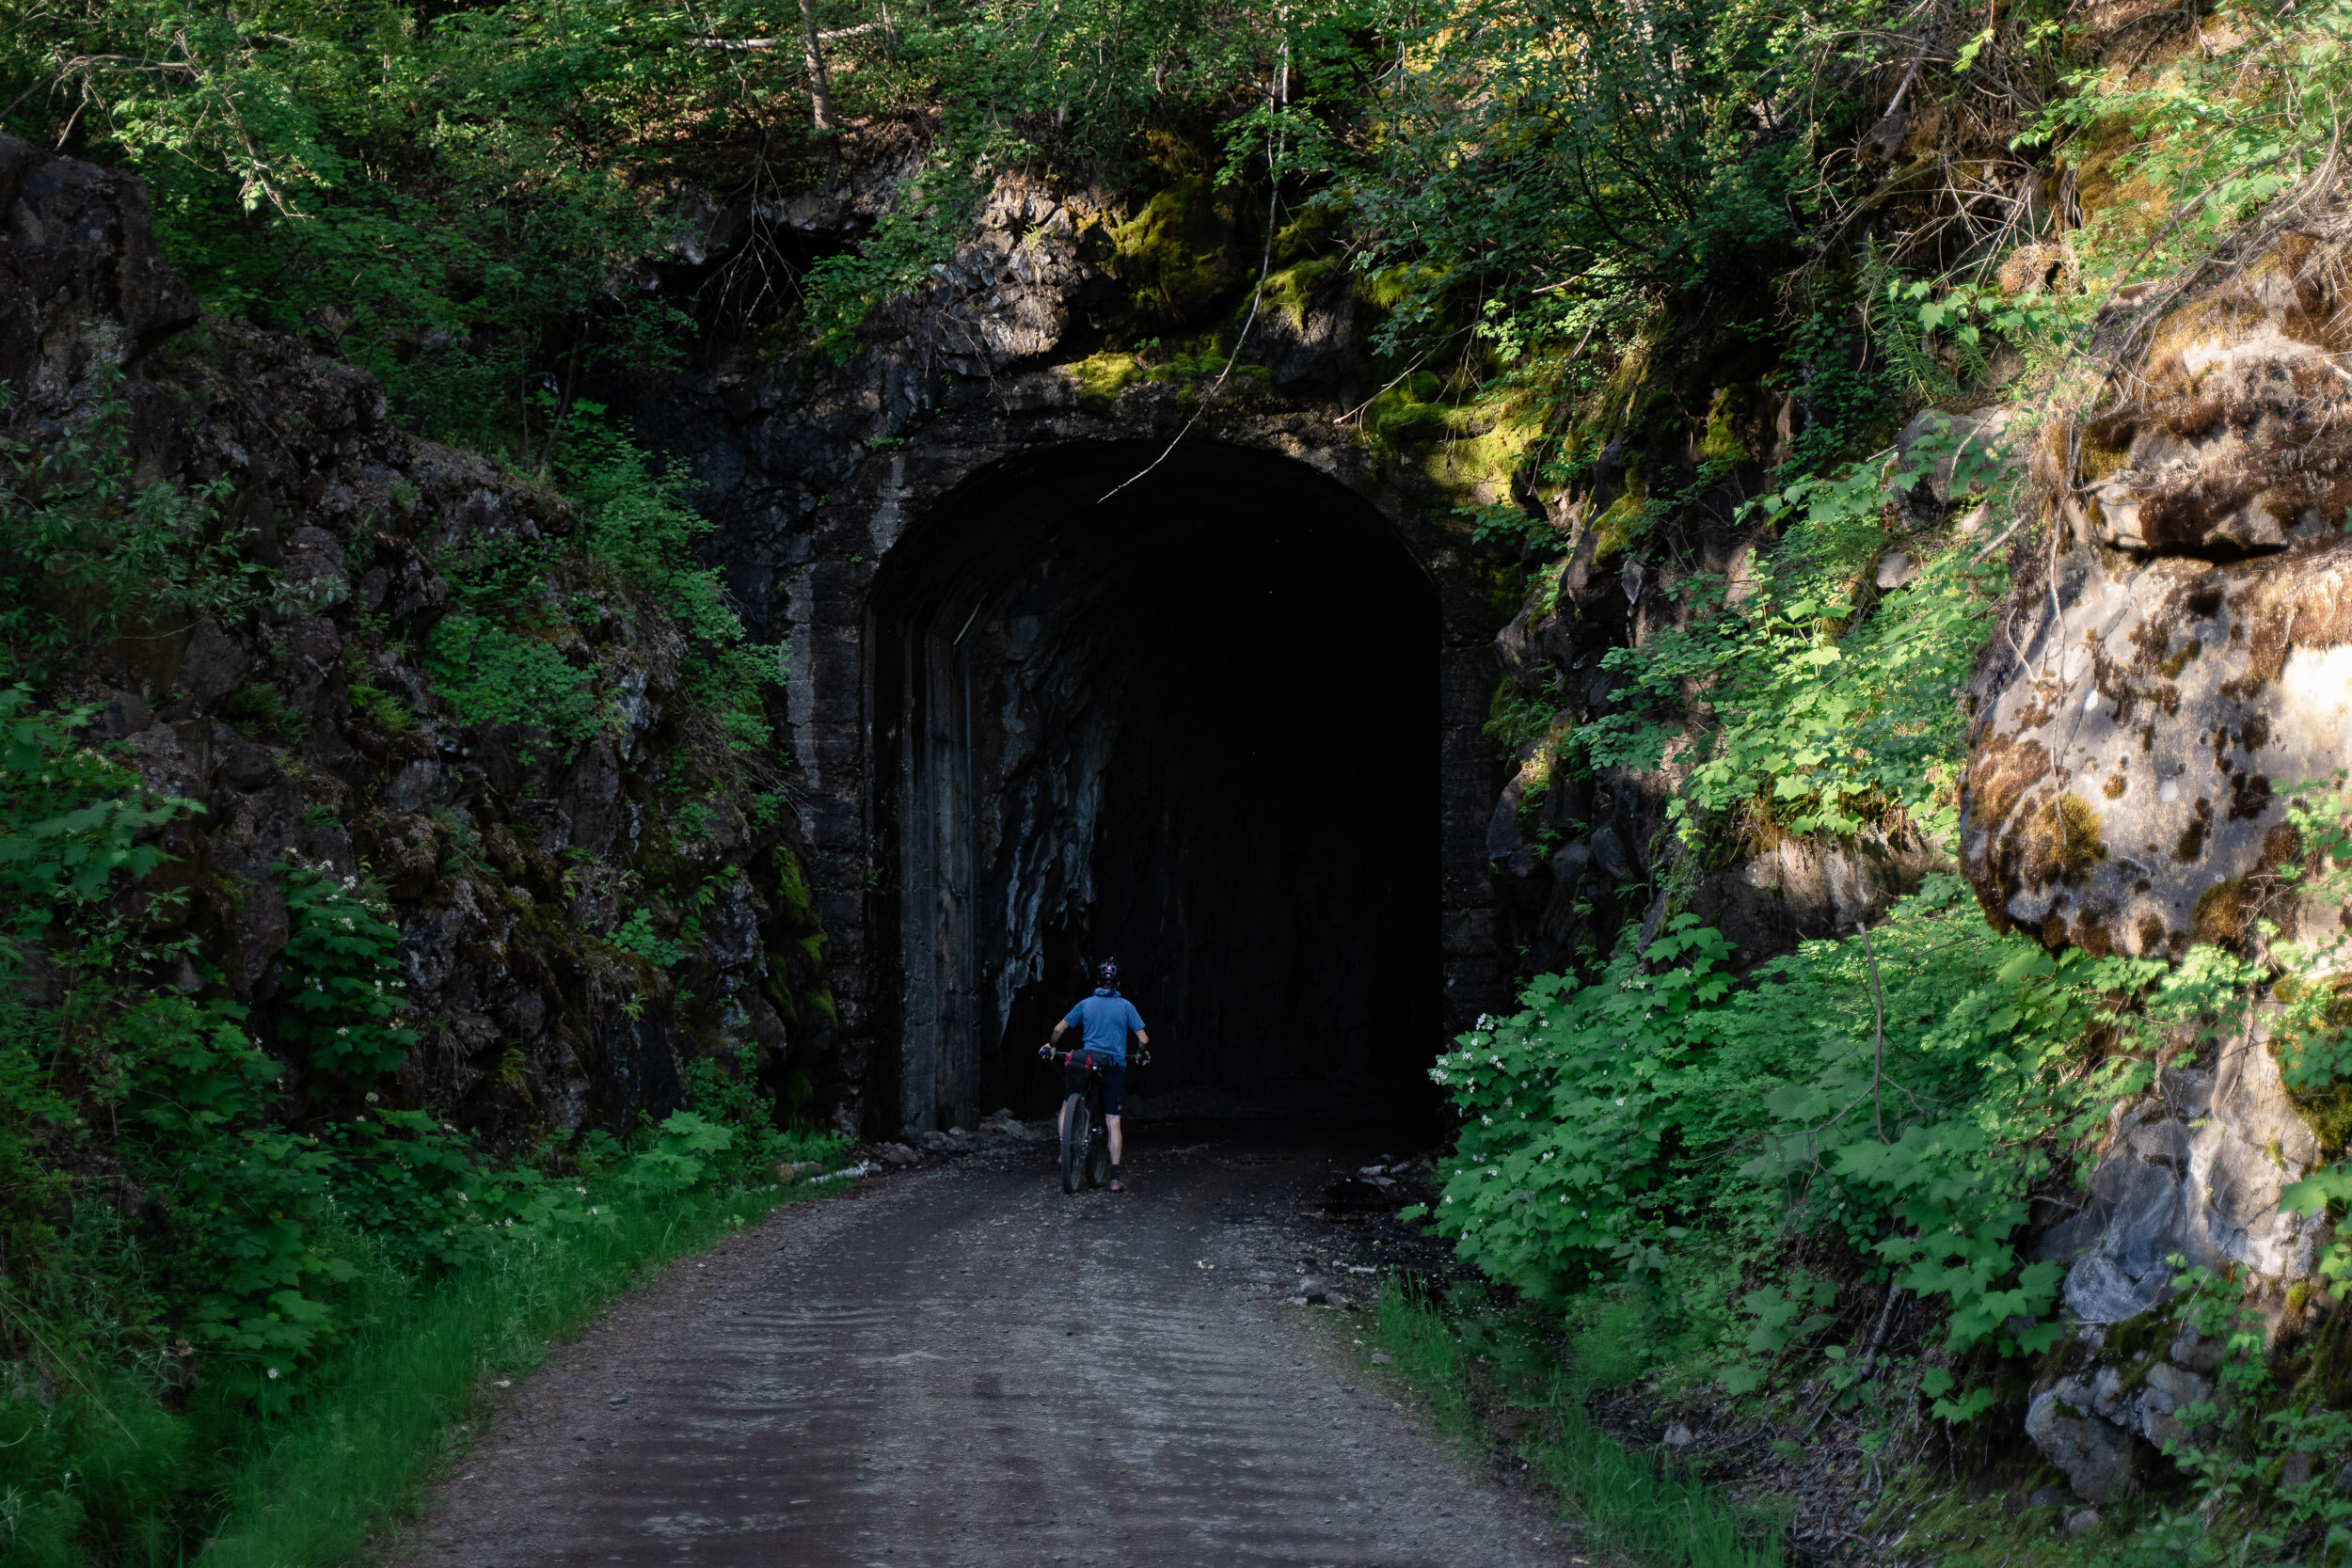  The Bulldog tunnel is the longest on the trail, at nearly 1km long. Once inside, you can't even see the other end. As soon as you approach the tunnel, you immediately feel the crisp cool air coming from the entrance. With the extreme heat we were de